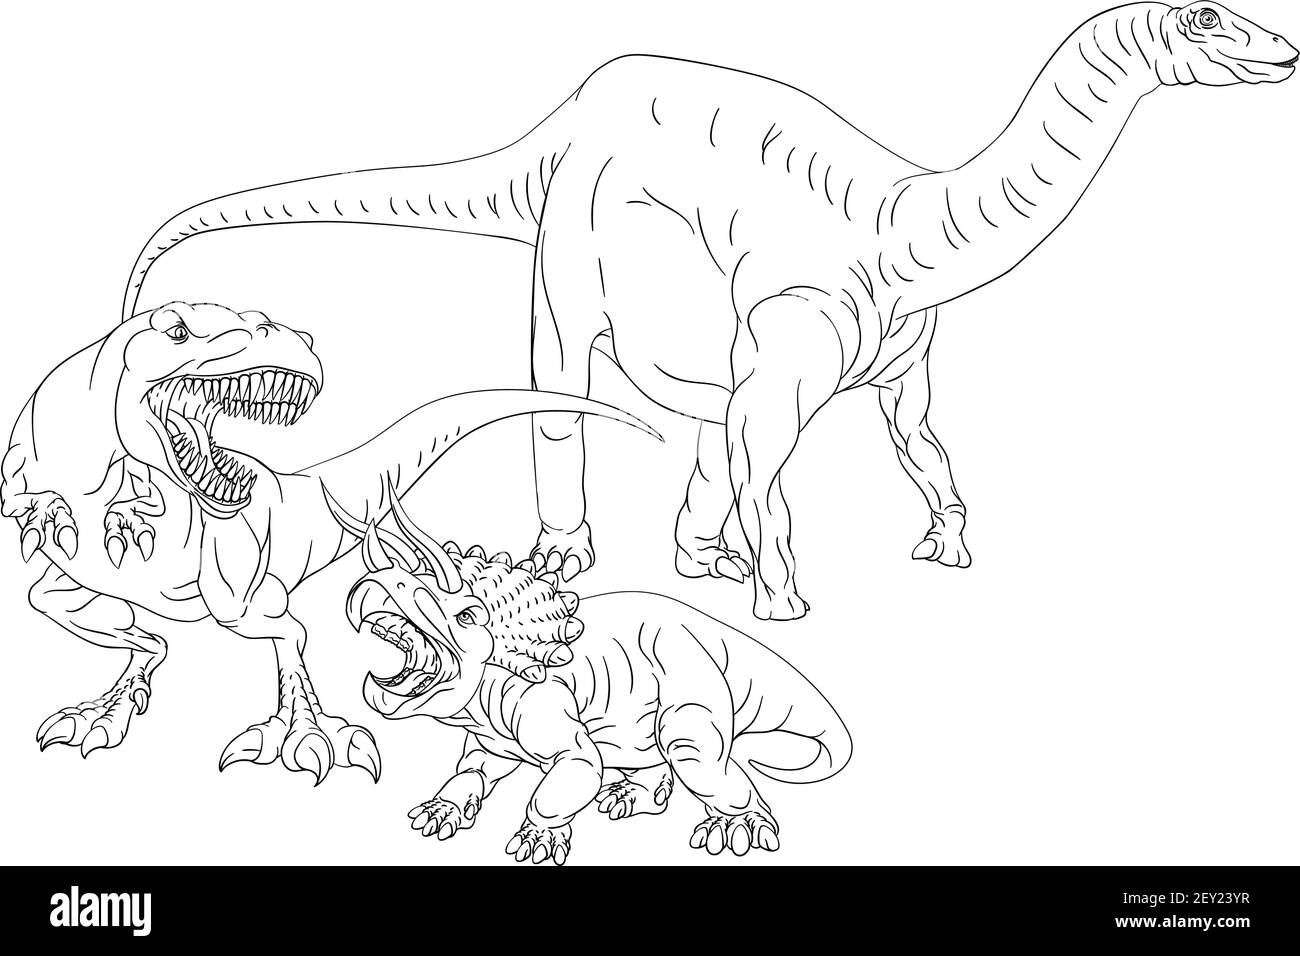 Coloring Book Page Dinosaurs In Outline Stock Vector